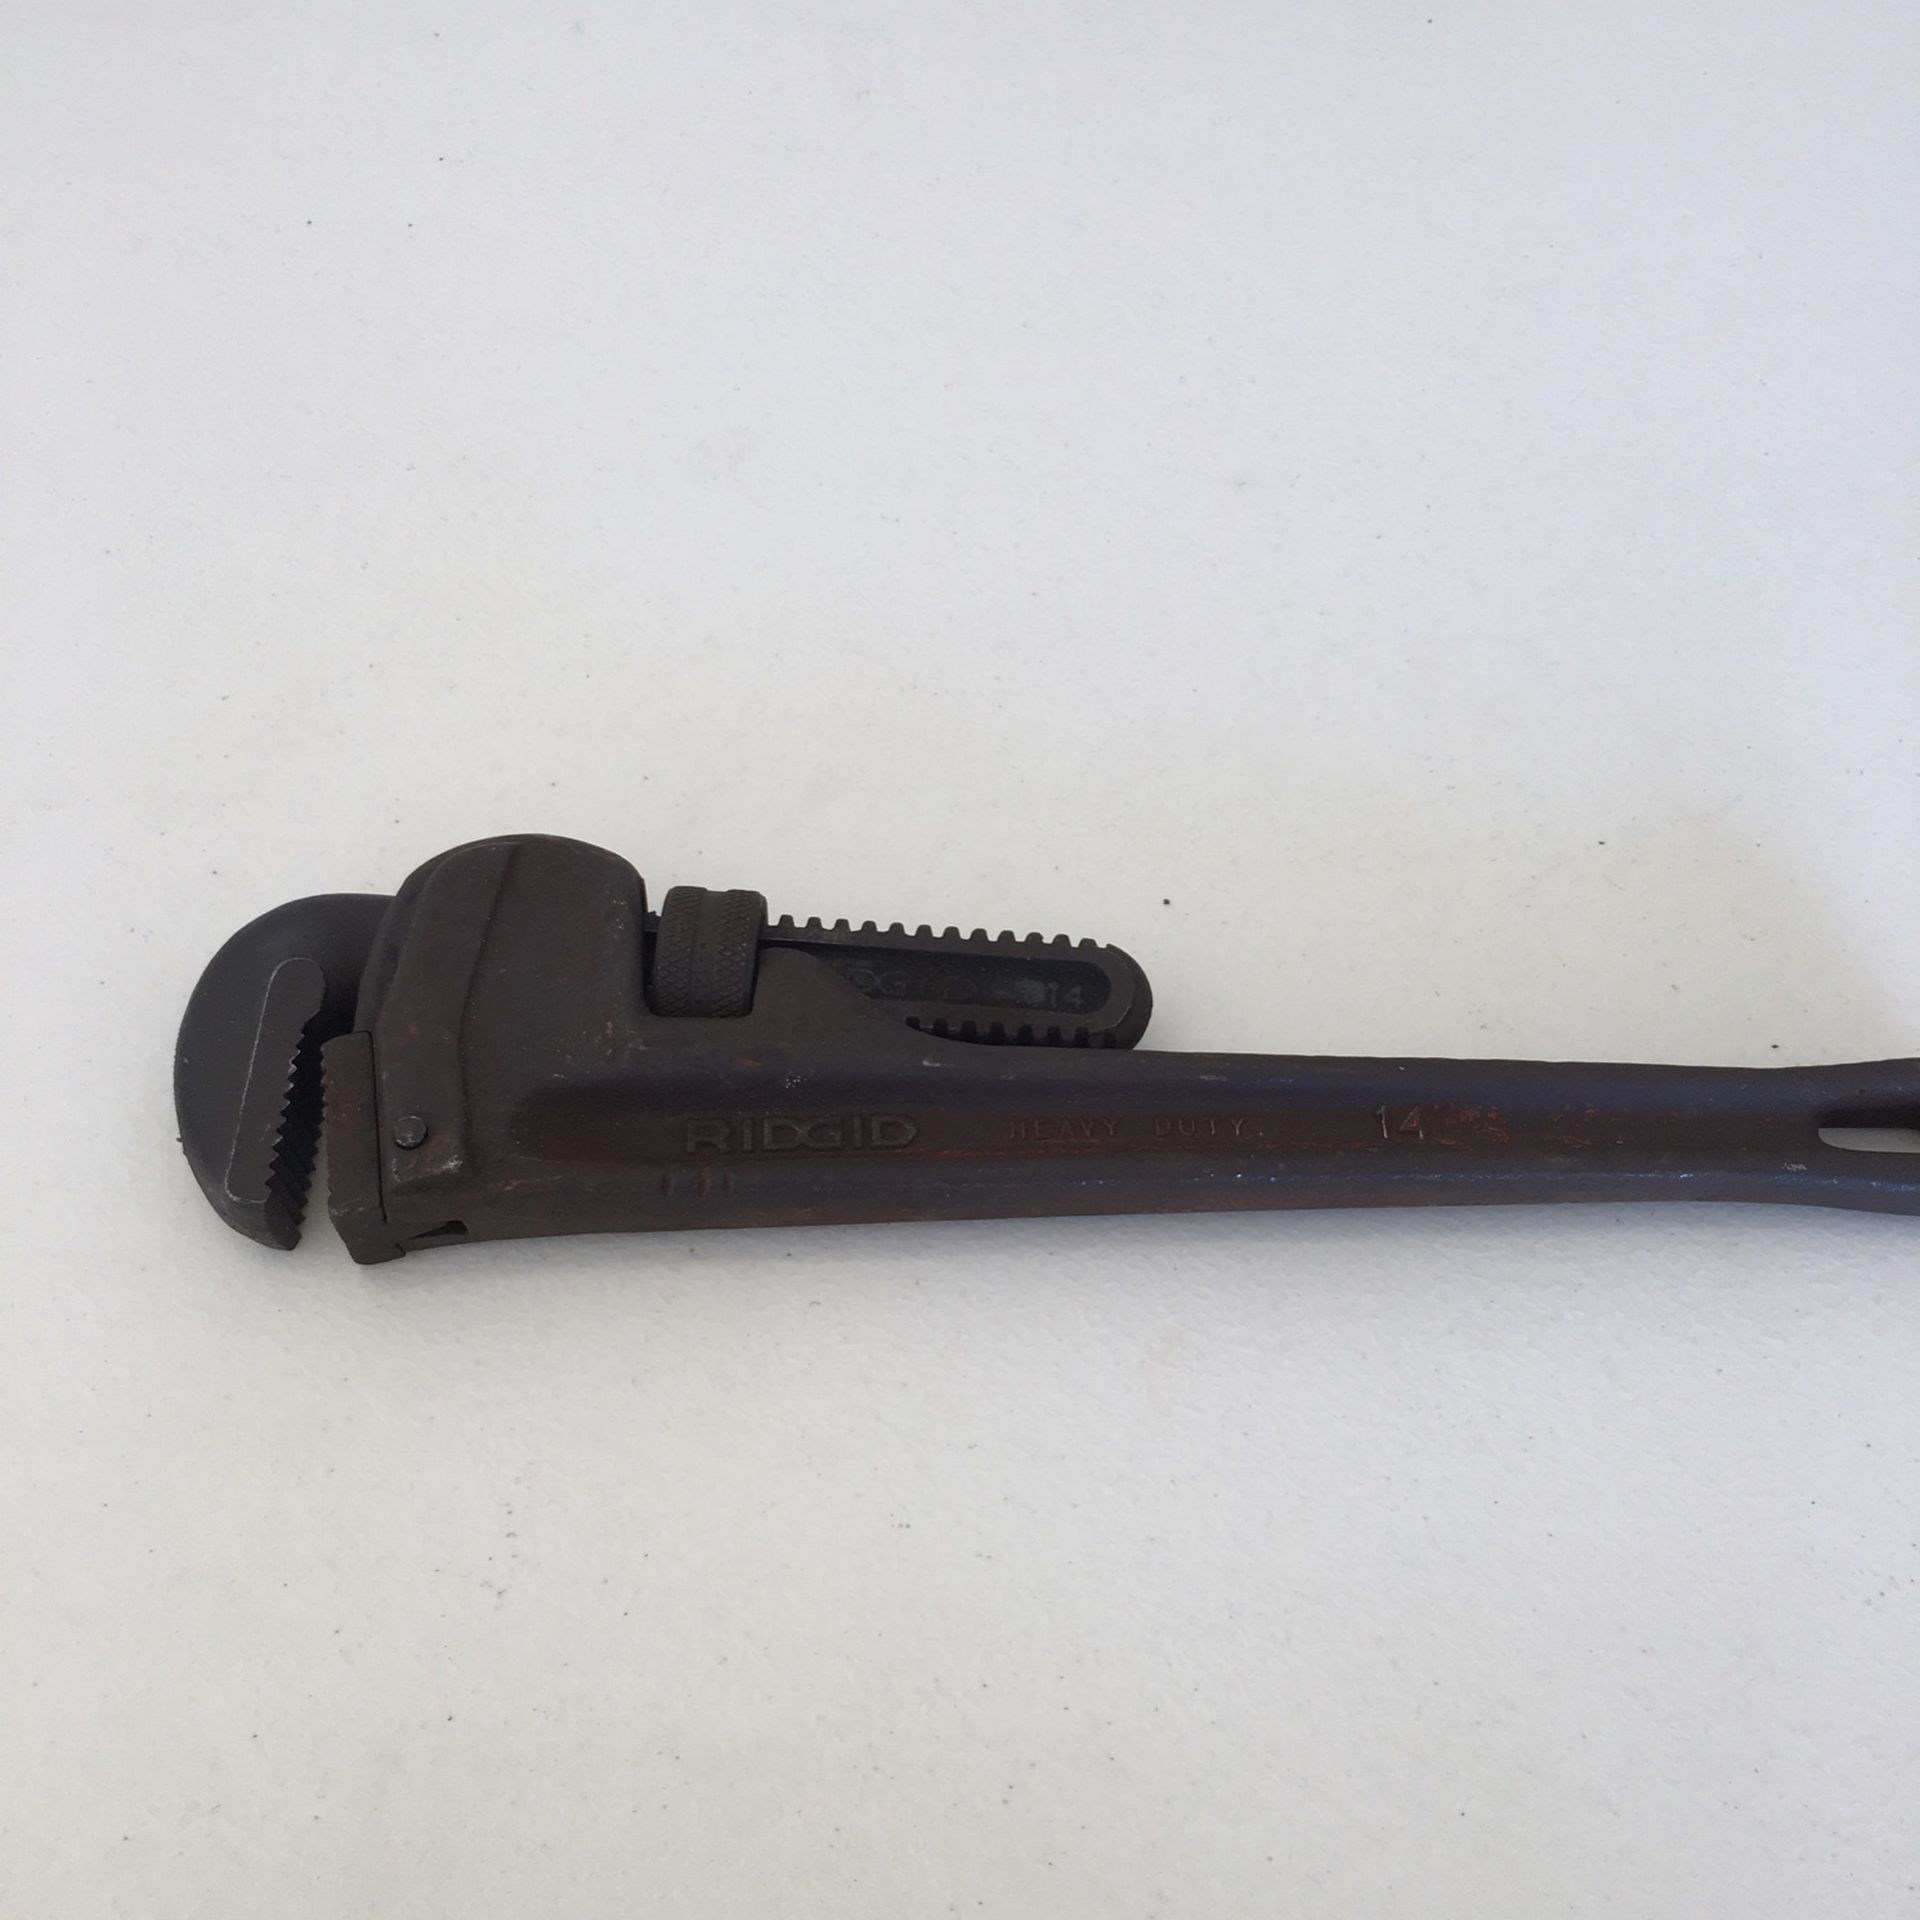 Rigid 14” Pipe Wrench